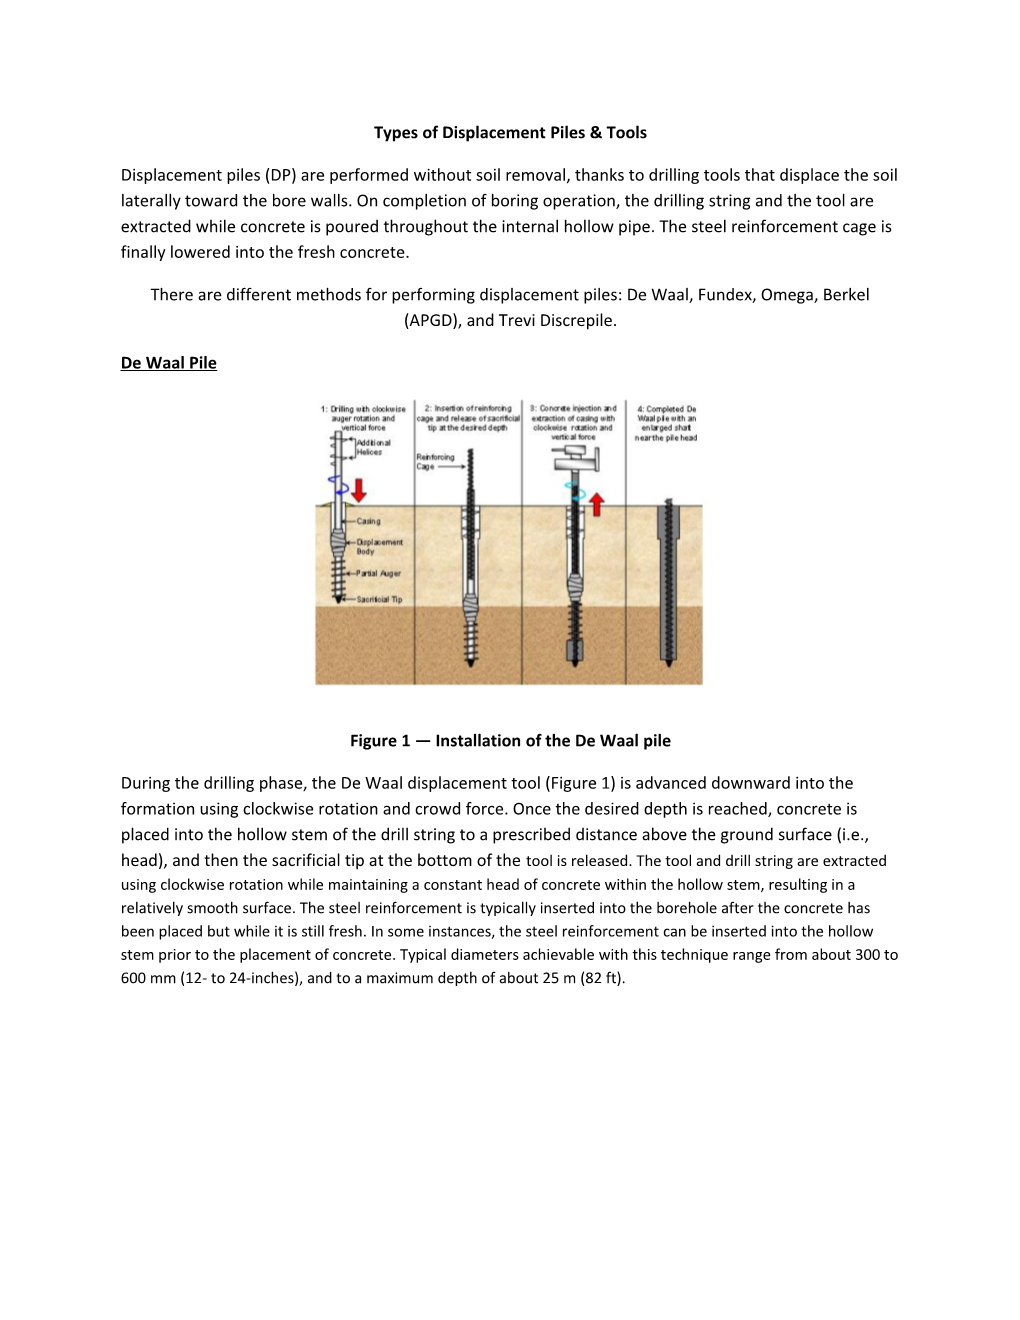 Types of Displacement Piles & Tools